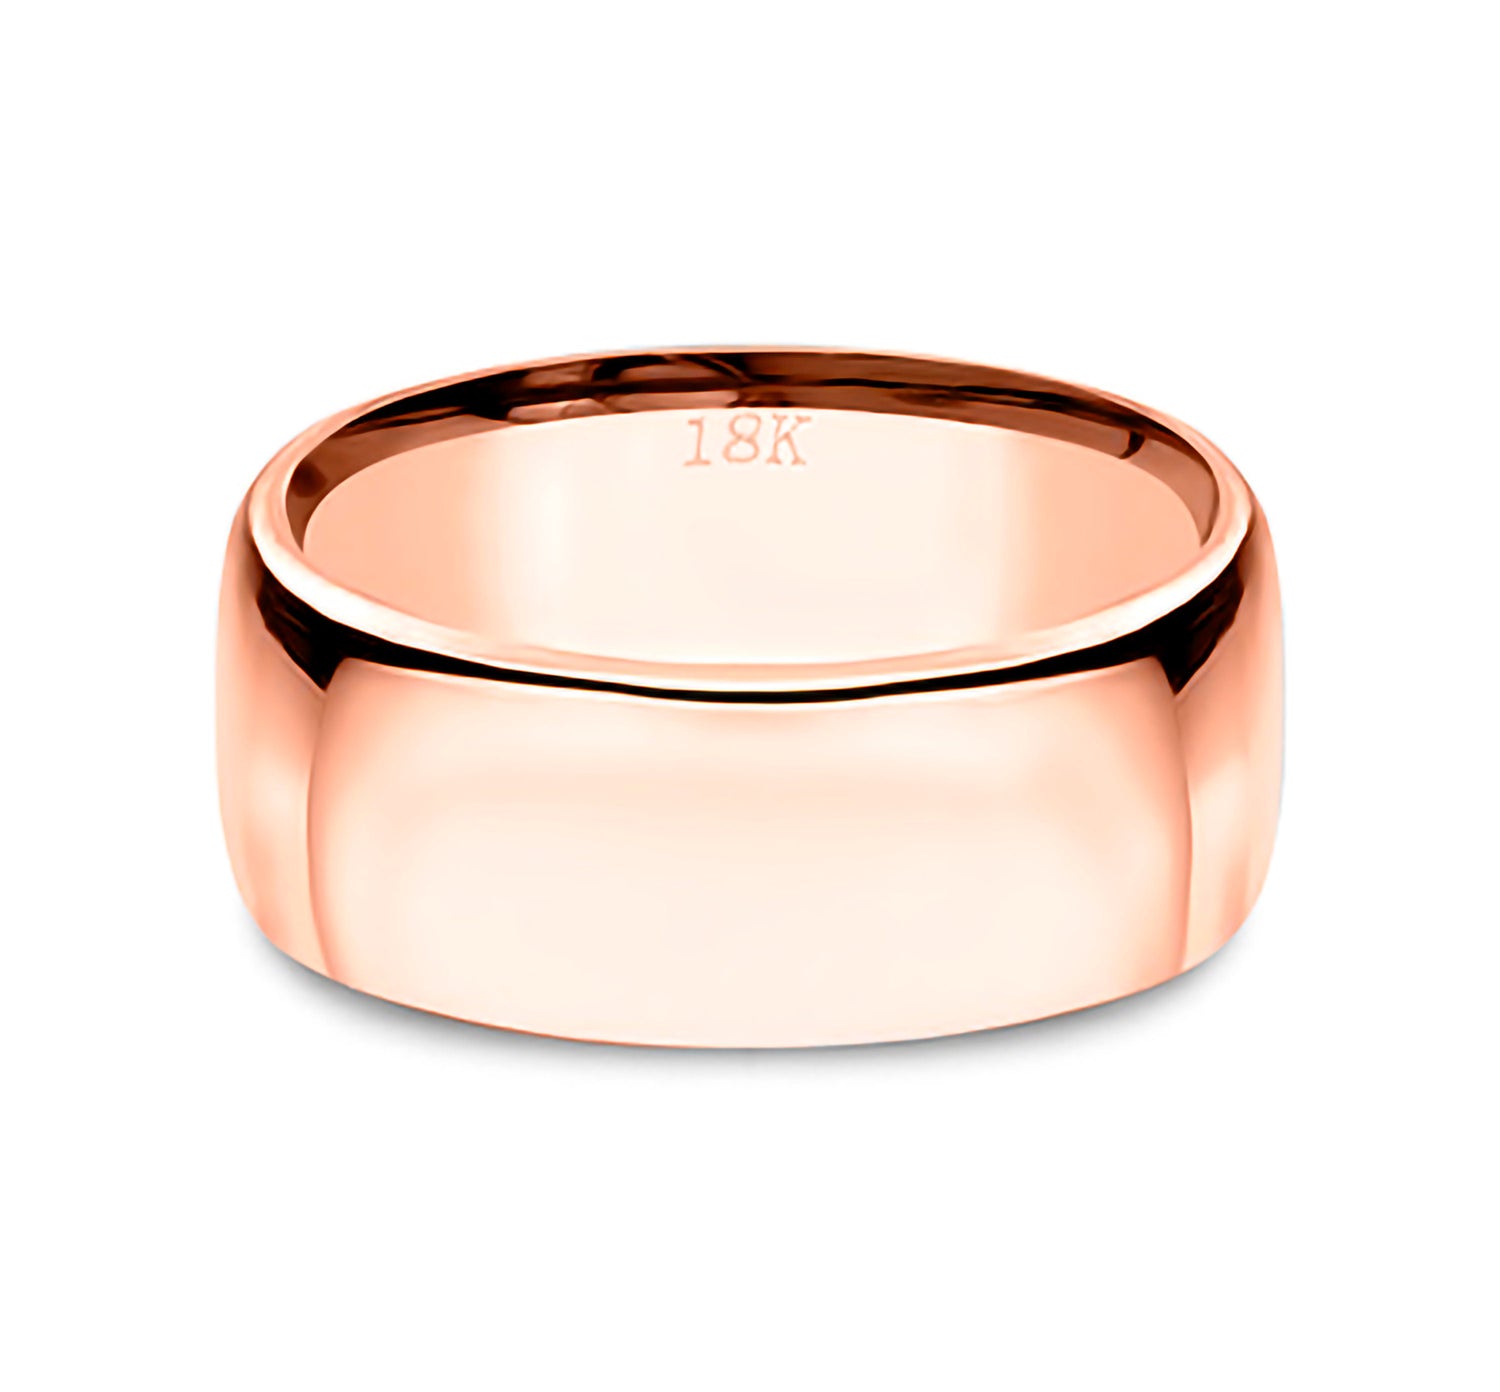 18K Solid Gold Dome Wedding Band / 9 mm Rose Gold REAL Euro Dome Comfort Fit / Wedding Ring / Polished Men's and Women's Wedding Ring